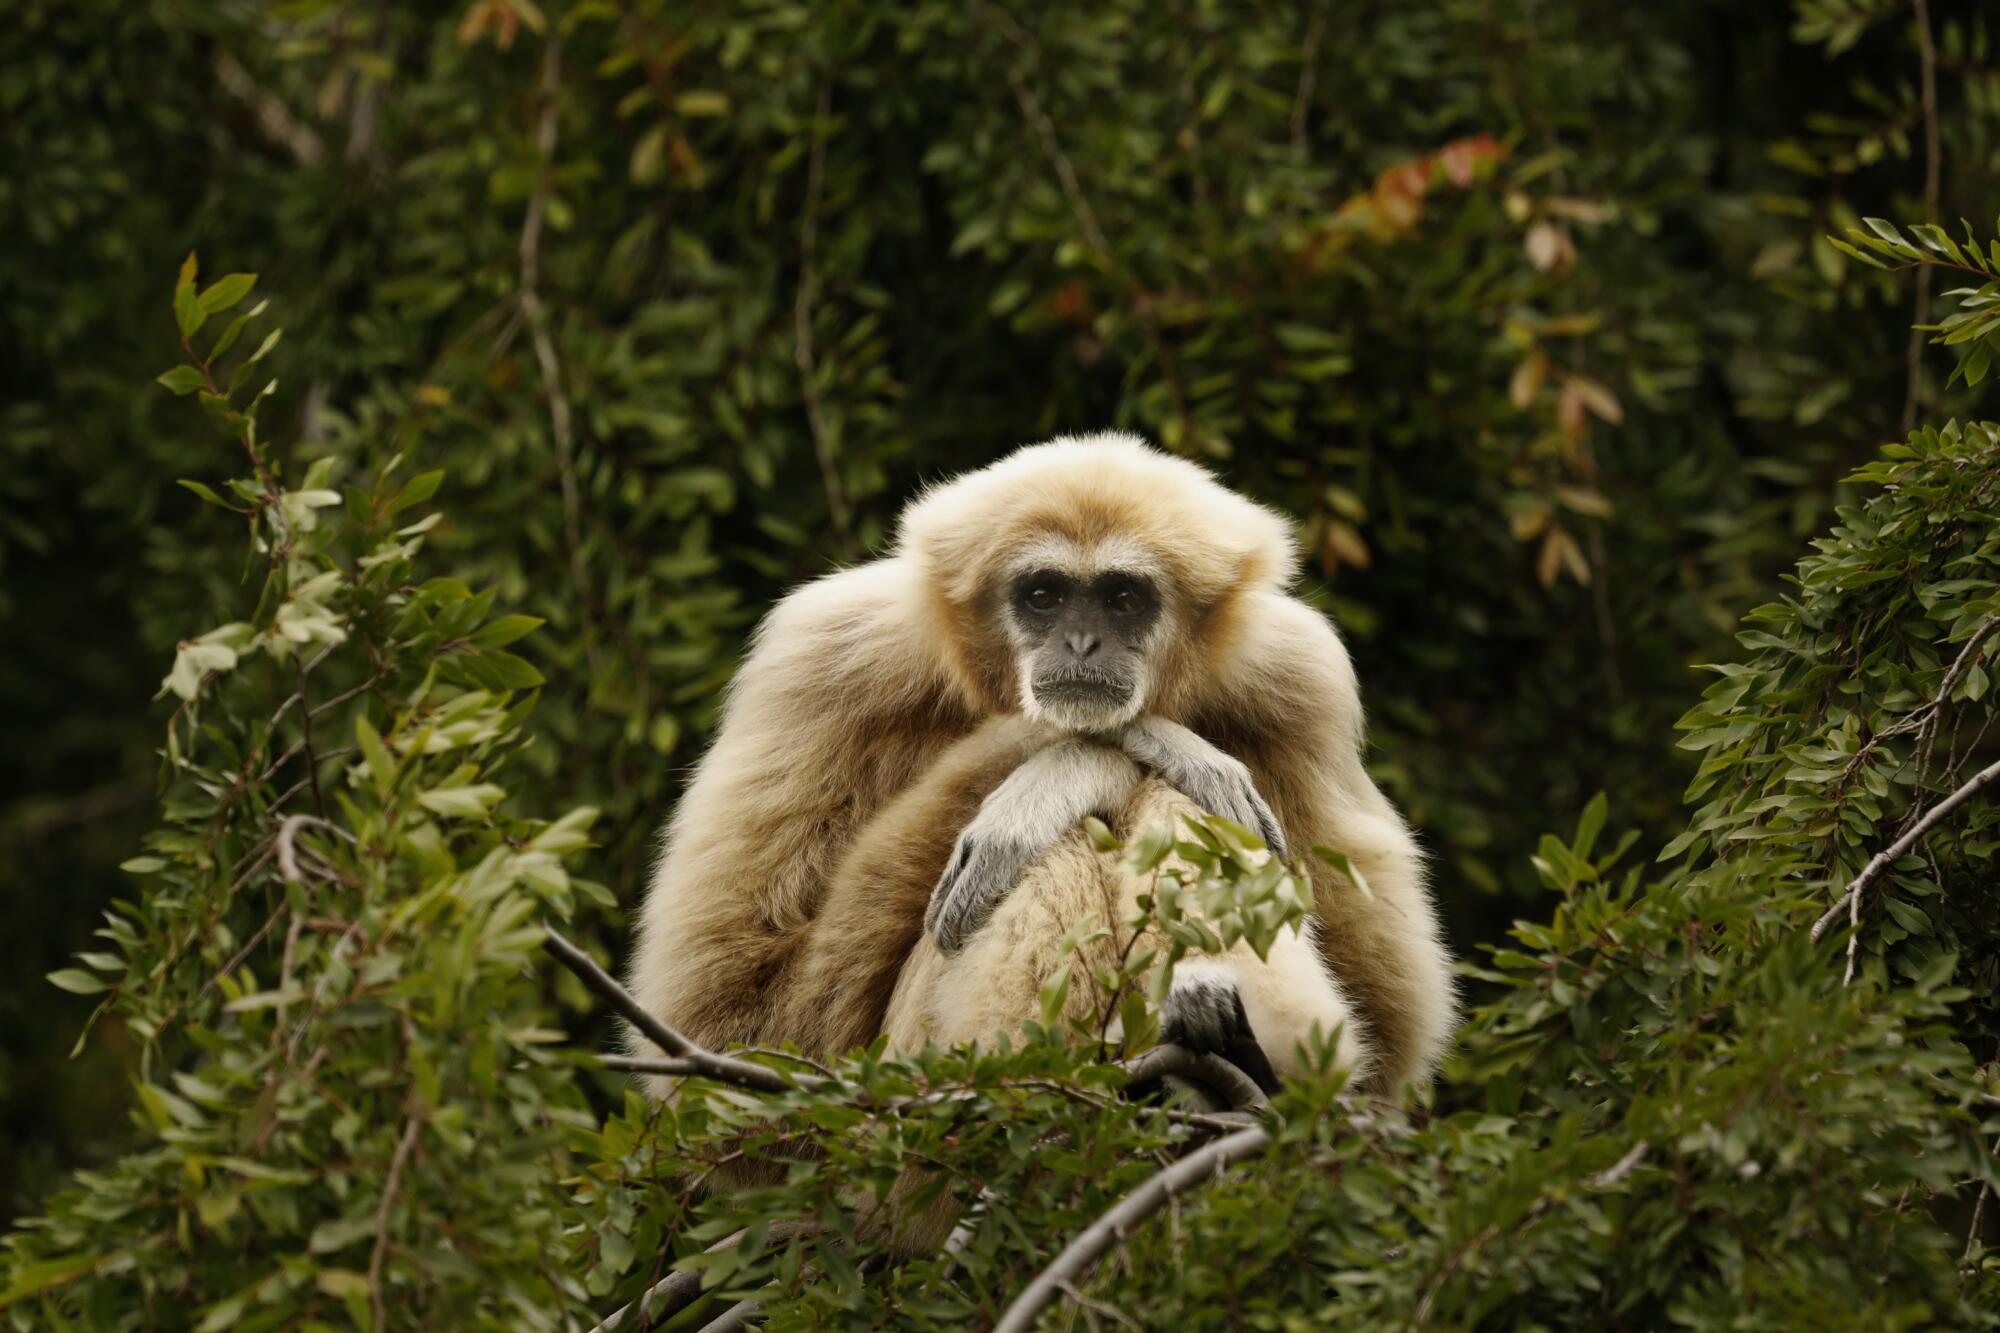 A female gibbon looks bored without visitors to look at at the Oakland Zoo